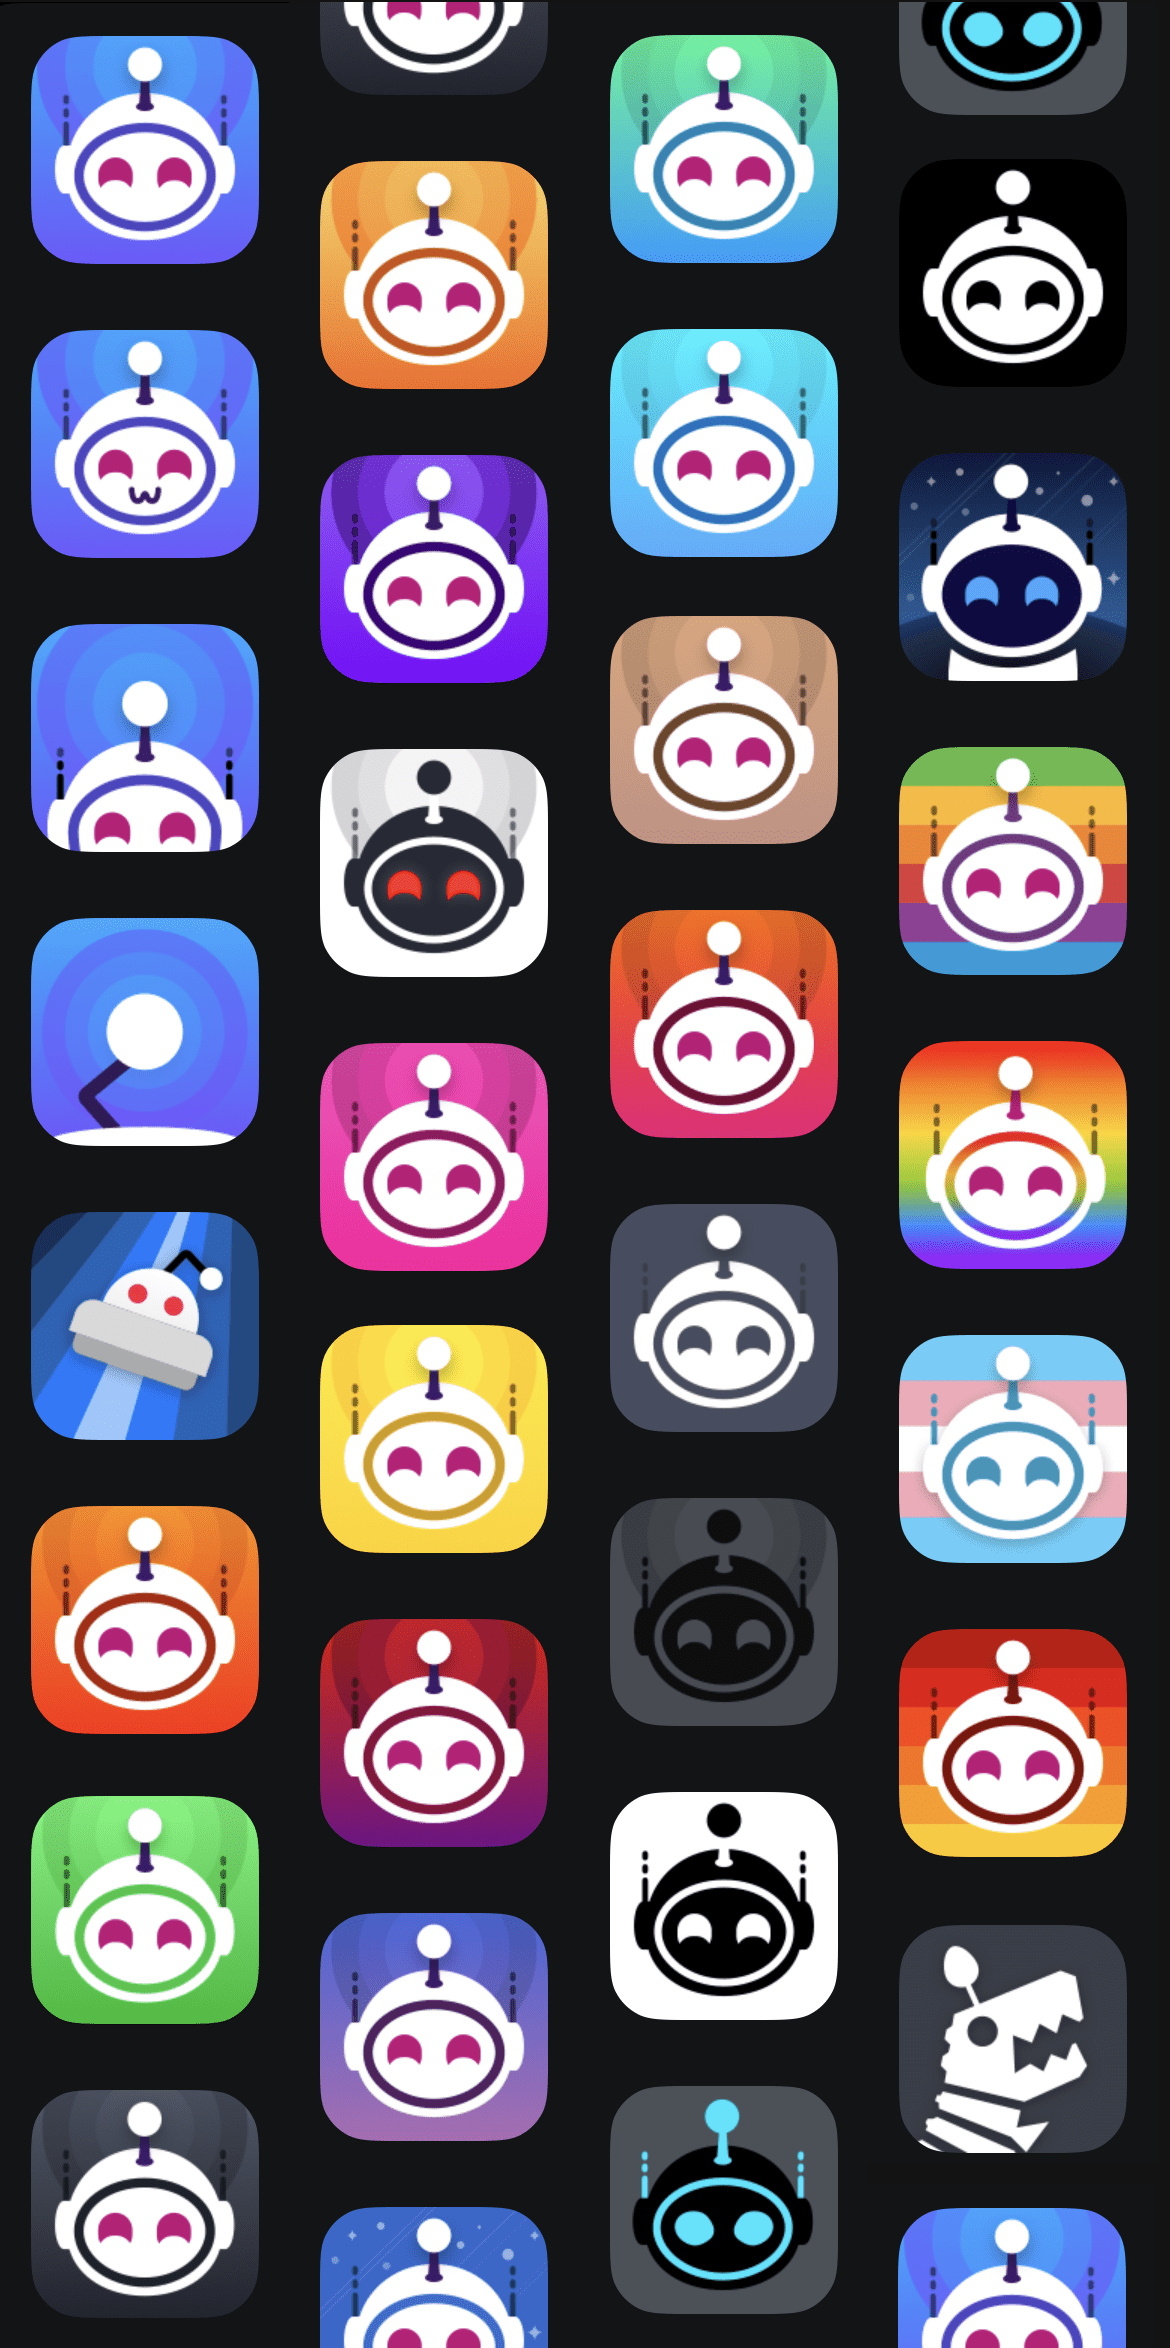 Screenshot of the default app icon variations from inside the “Apollo” app.